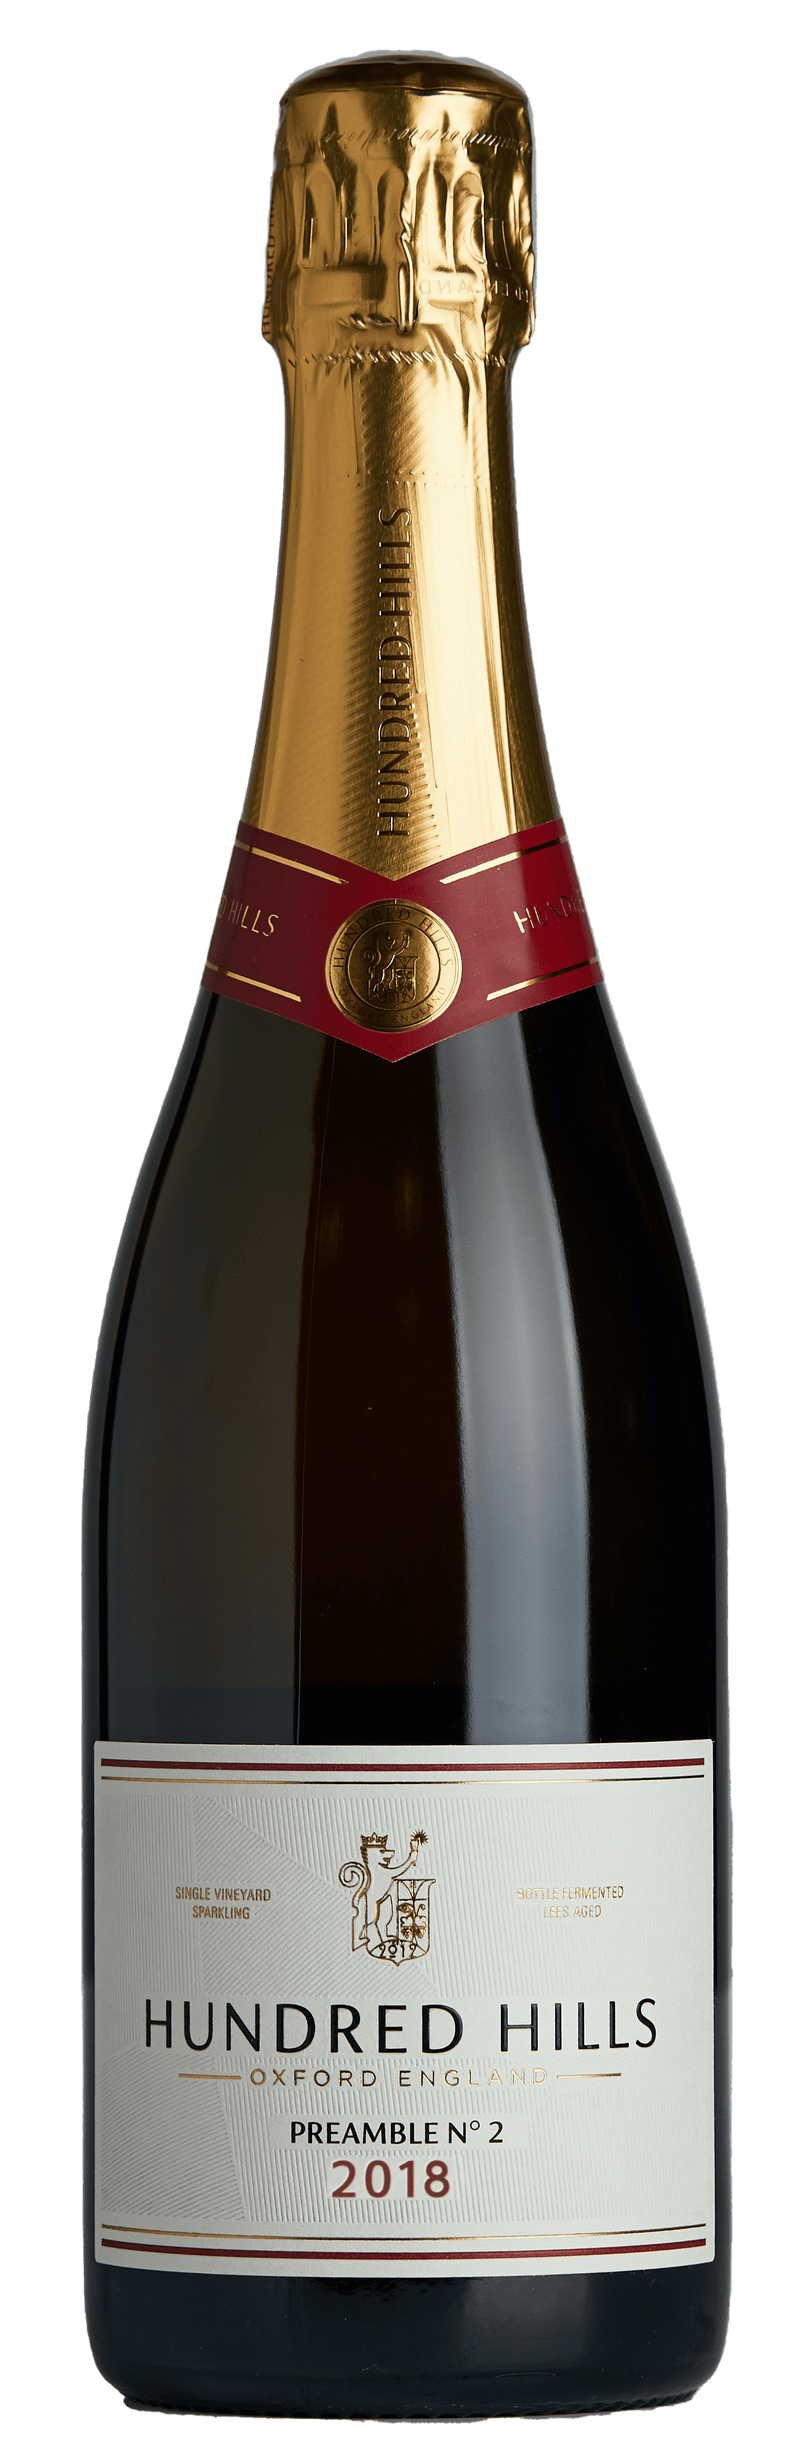 Hundred Hills Sparkling Preamble No.2 2018 75cl